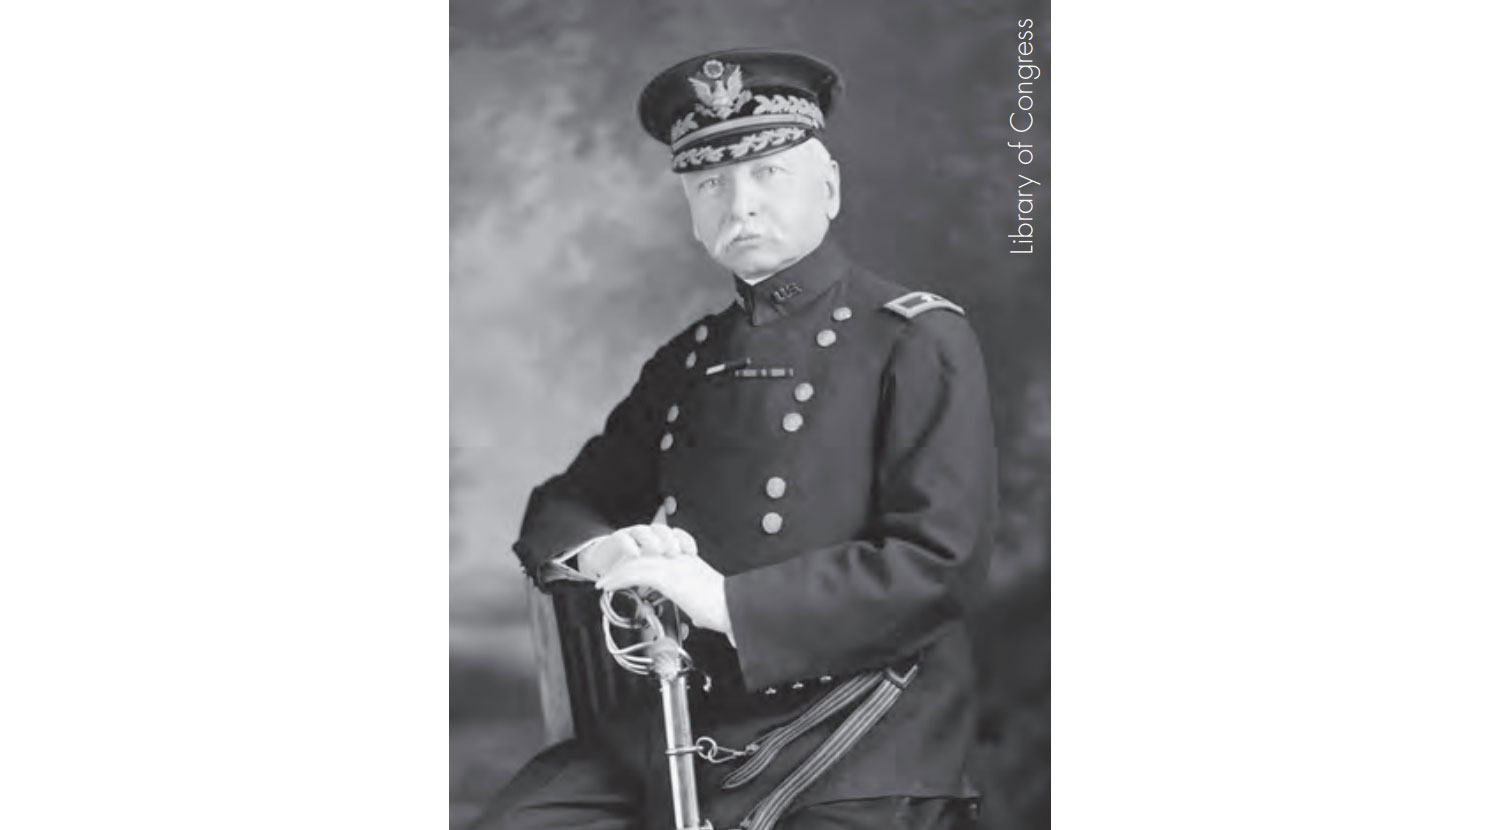 Edward McClernand, pictured here as a brigadier general, c. 1912.